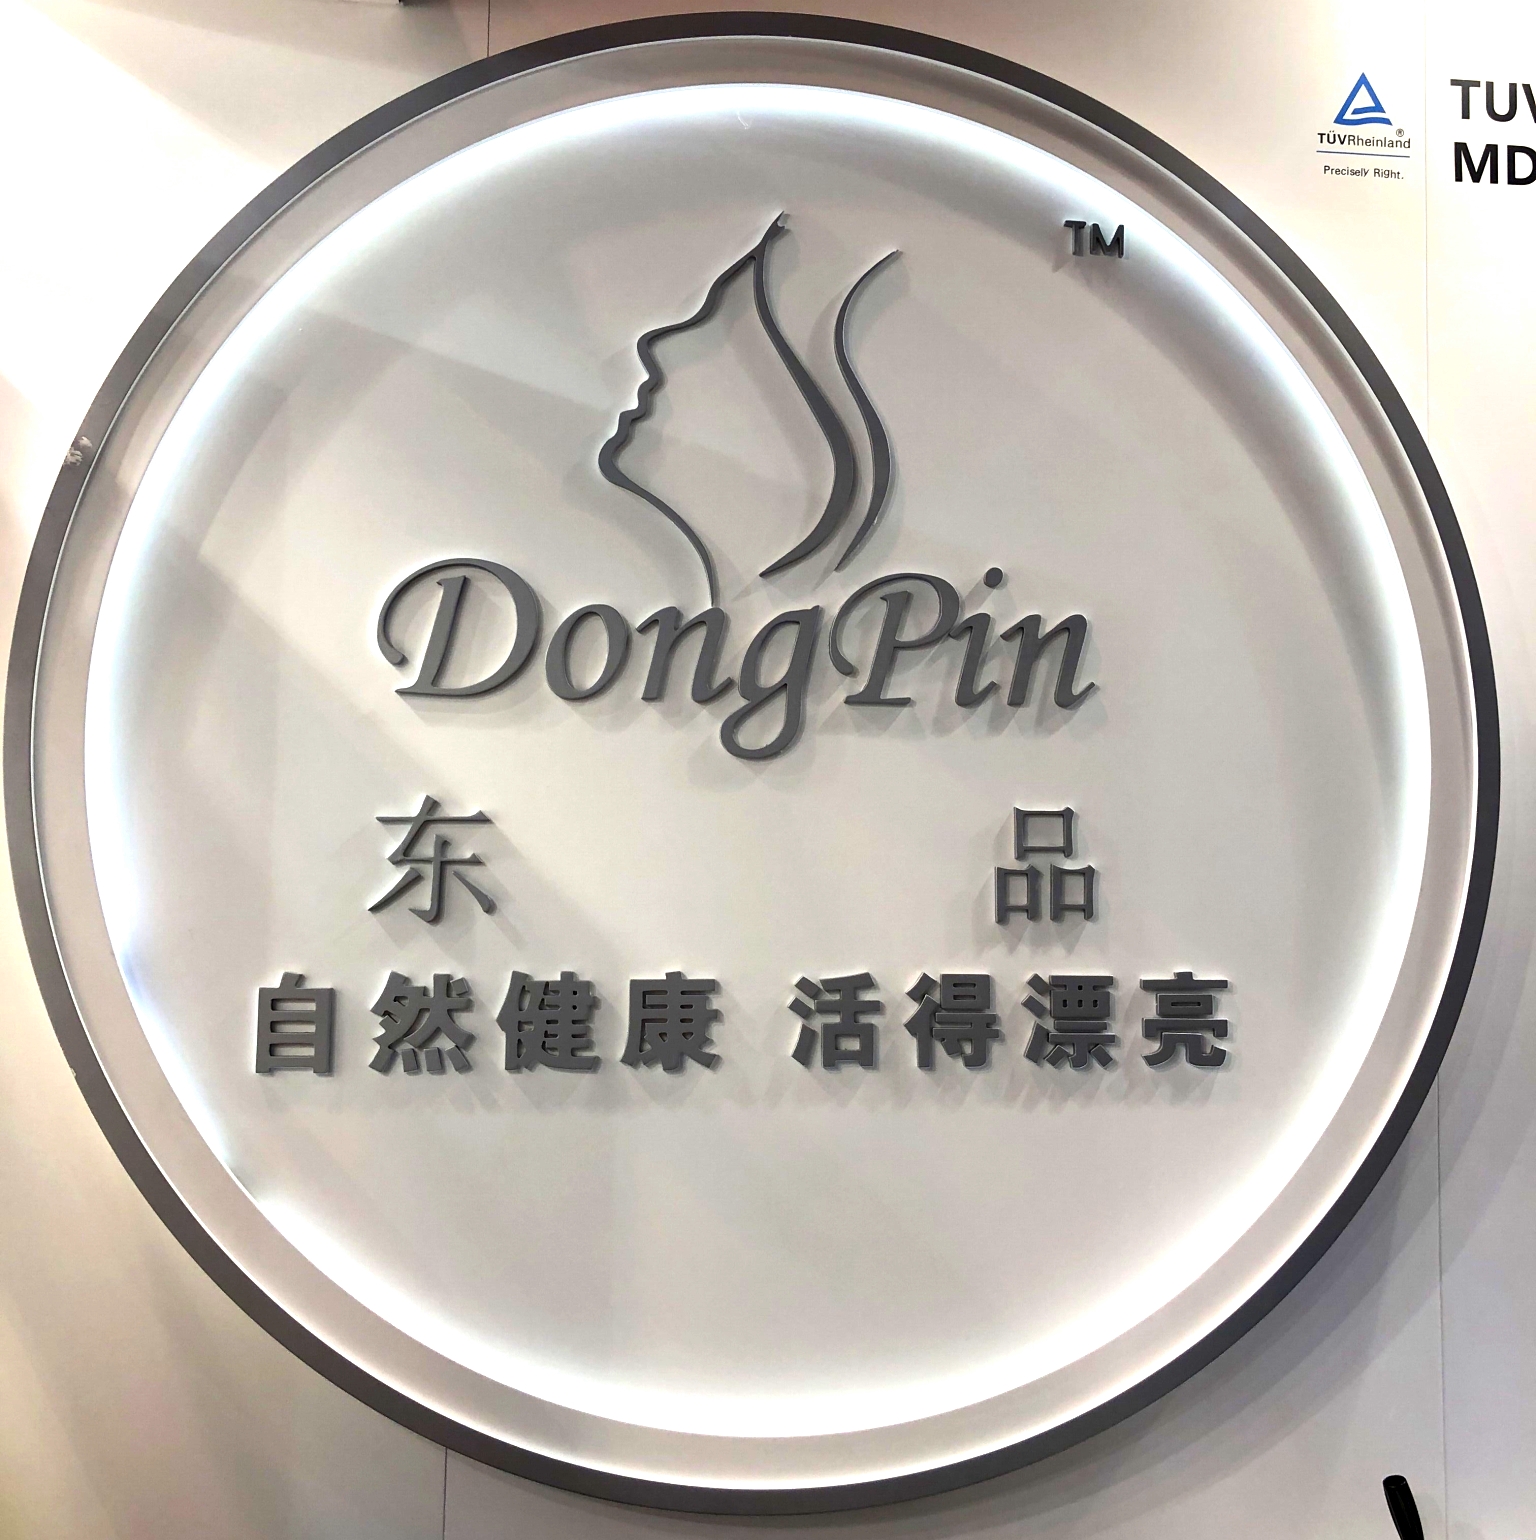 Dongpin team is ready for Cosmoprof Asia 2018